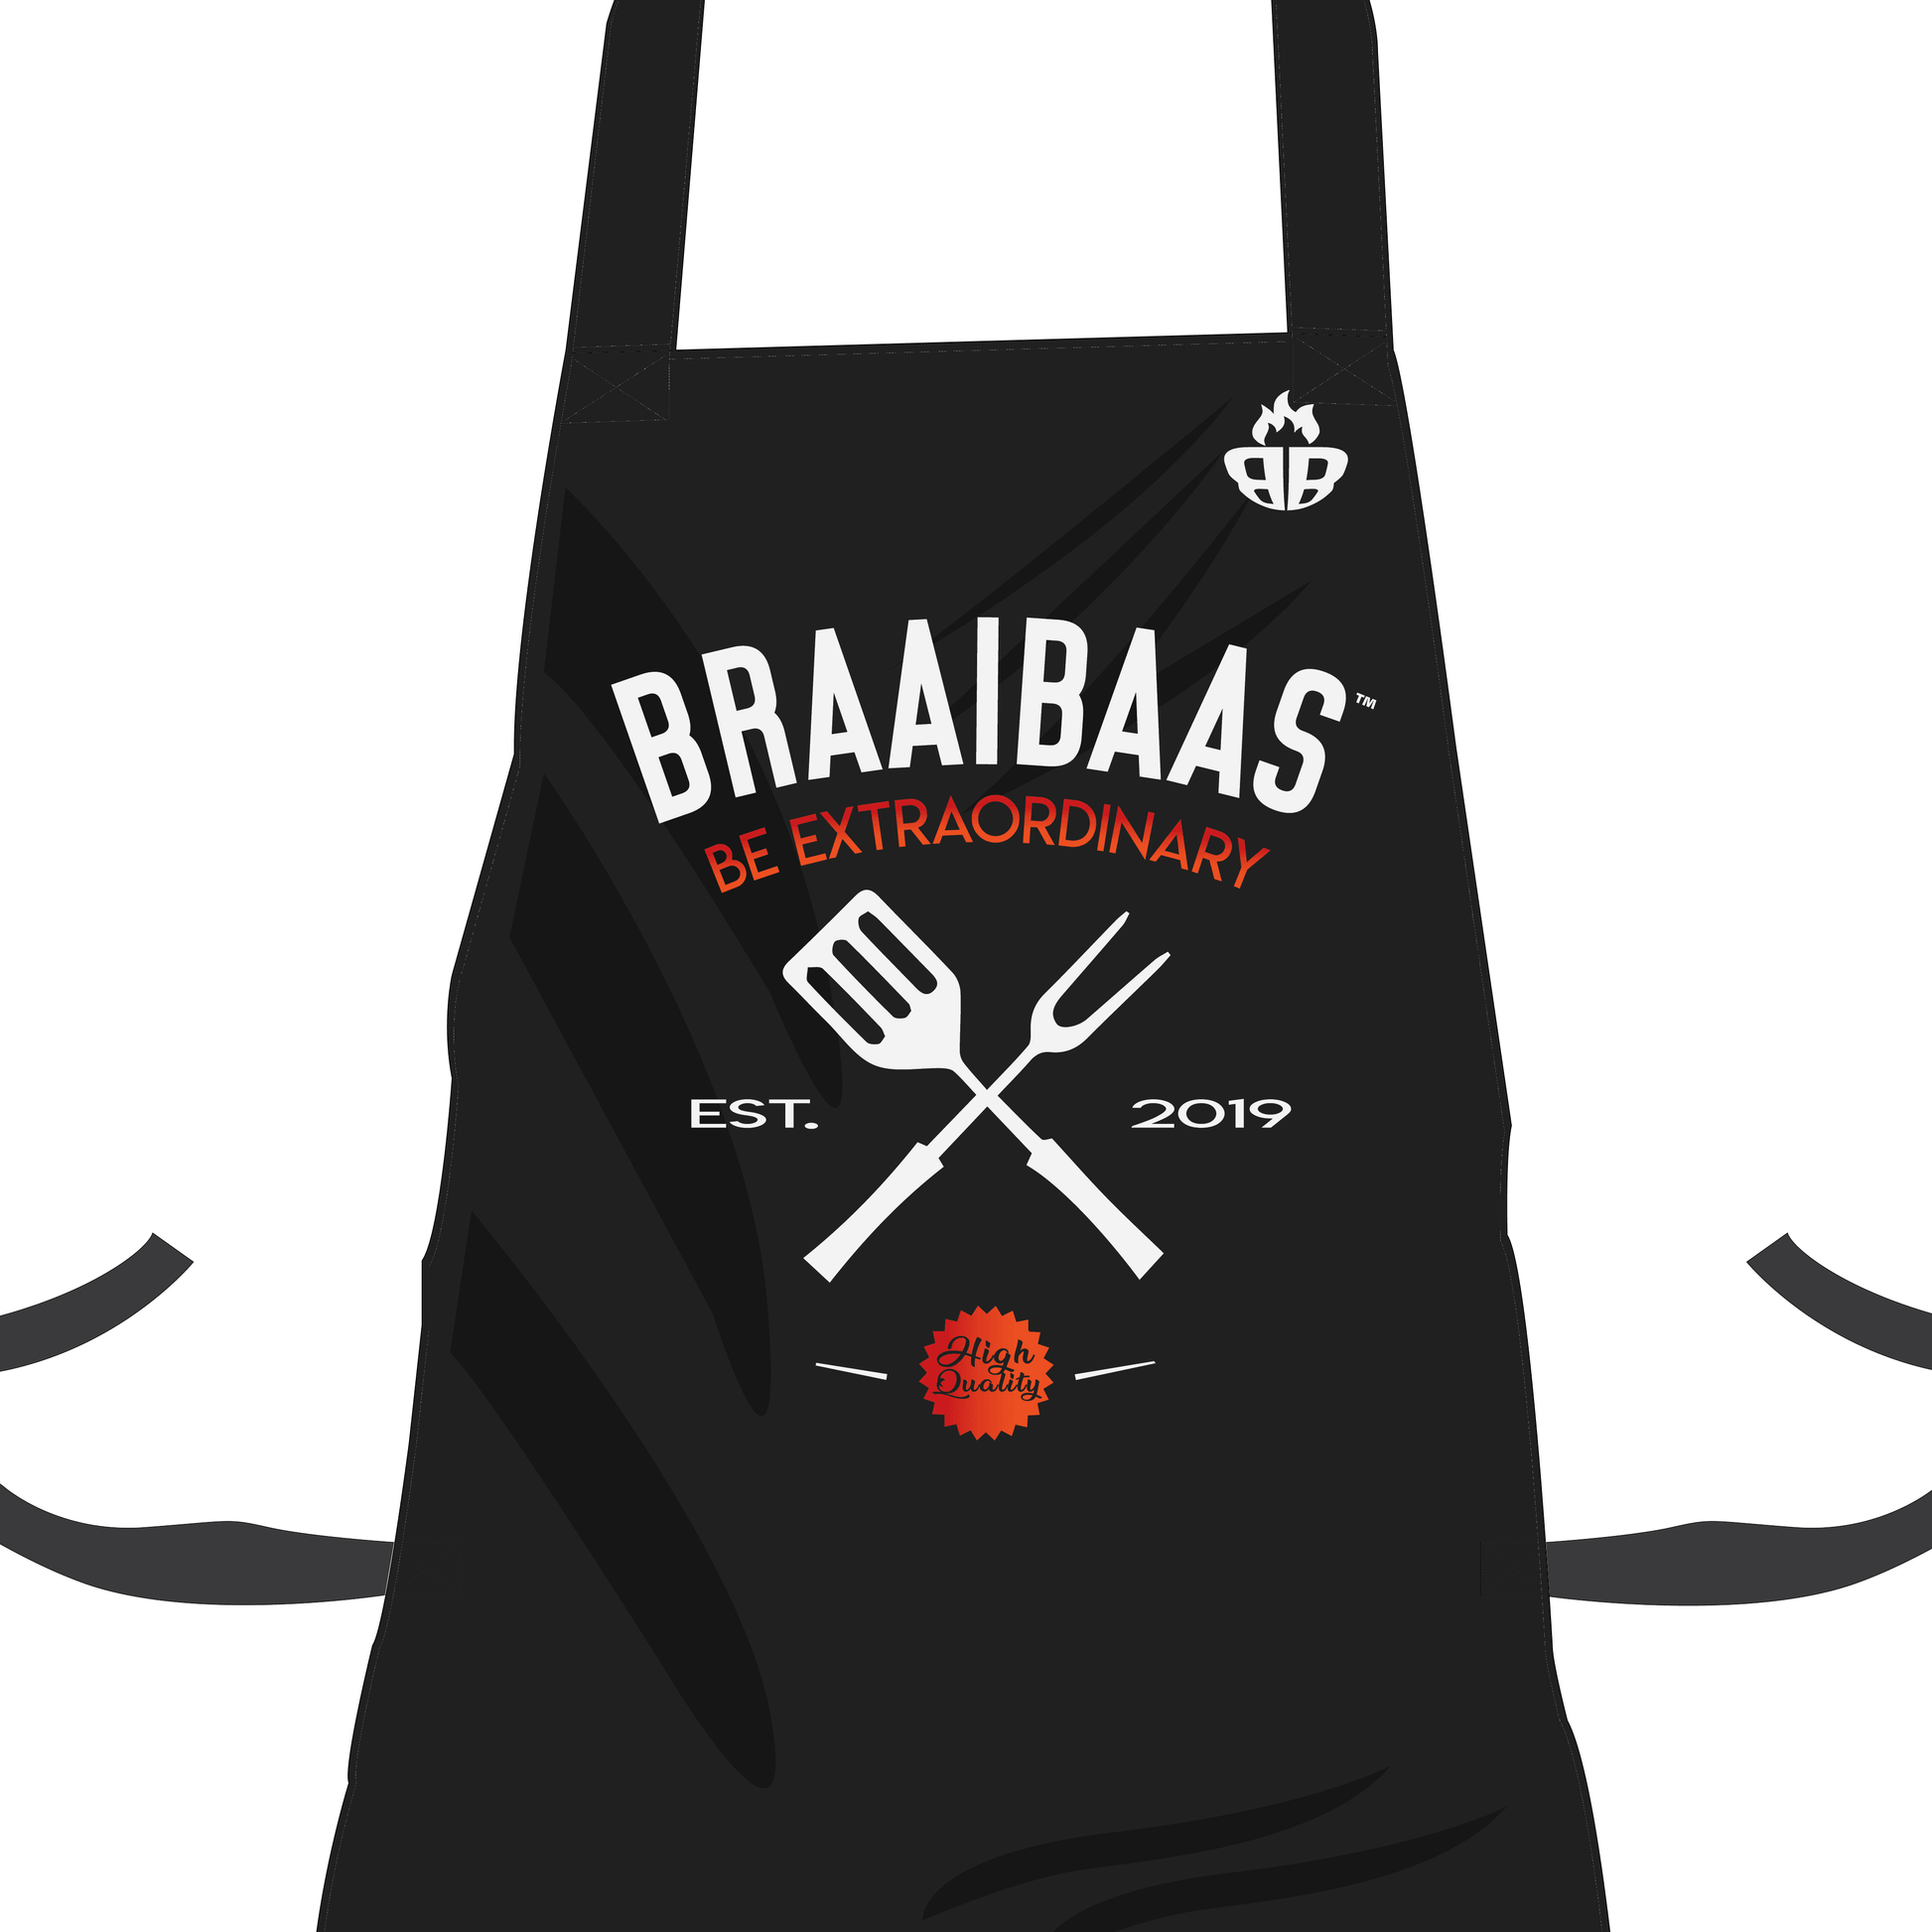 the best braai and cooking aprons for mens and womens